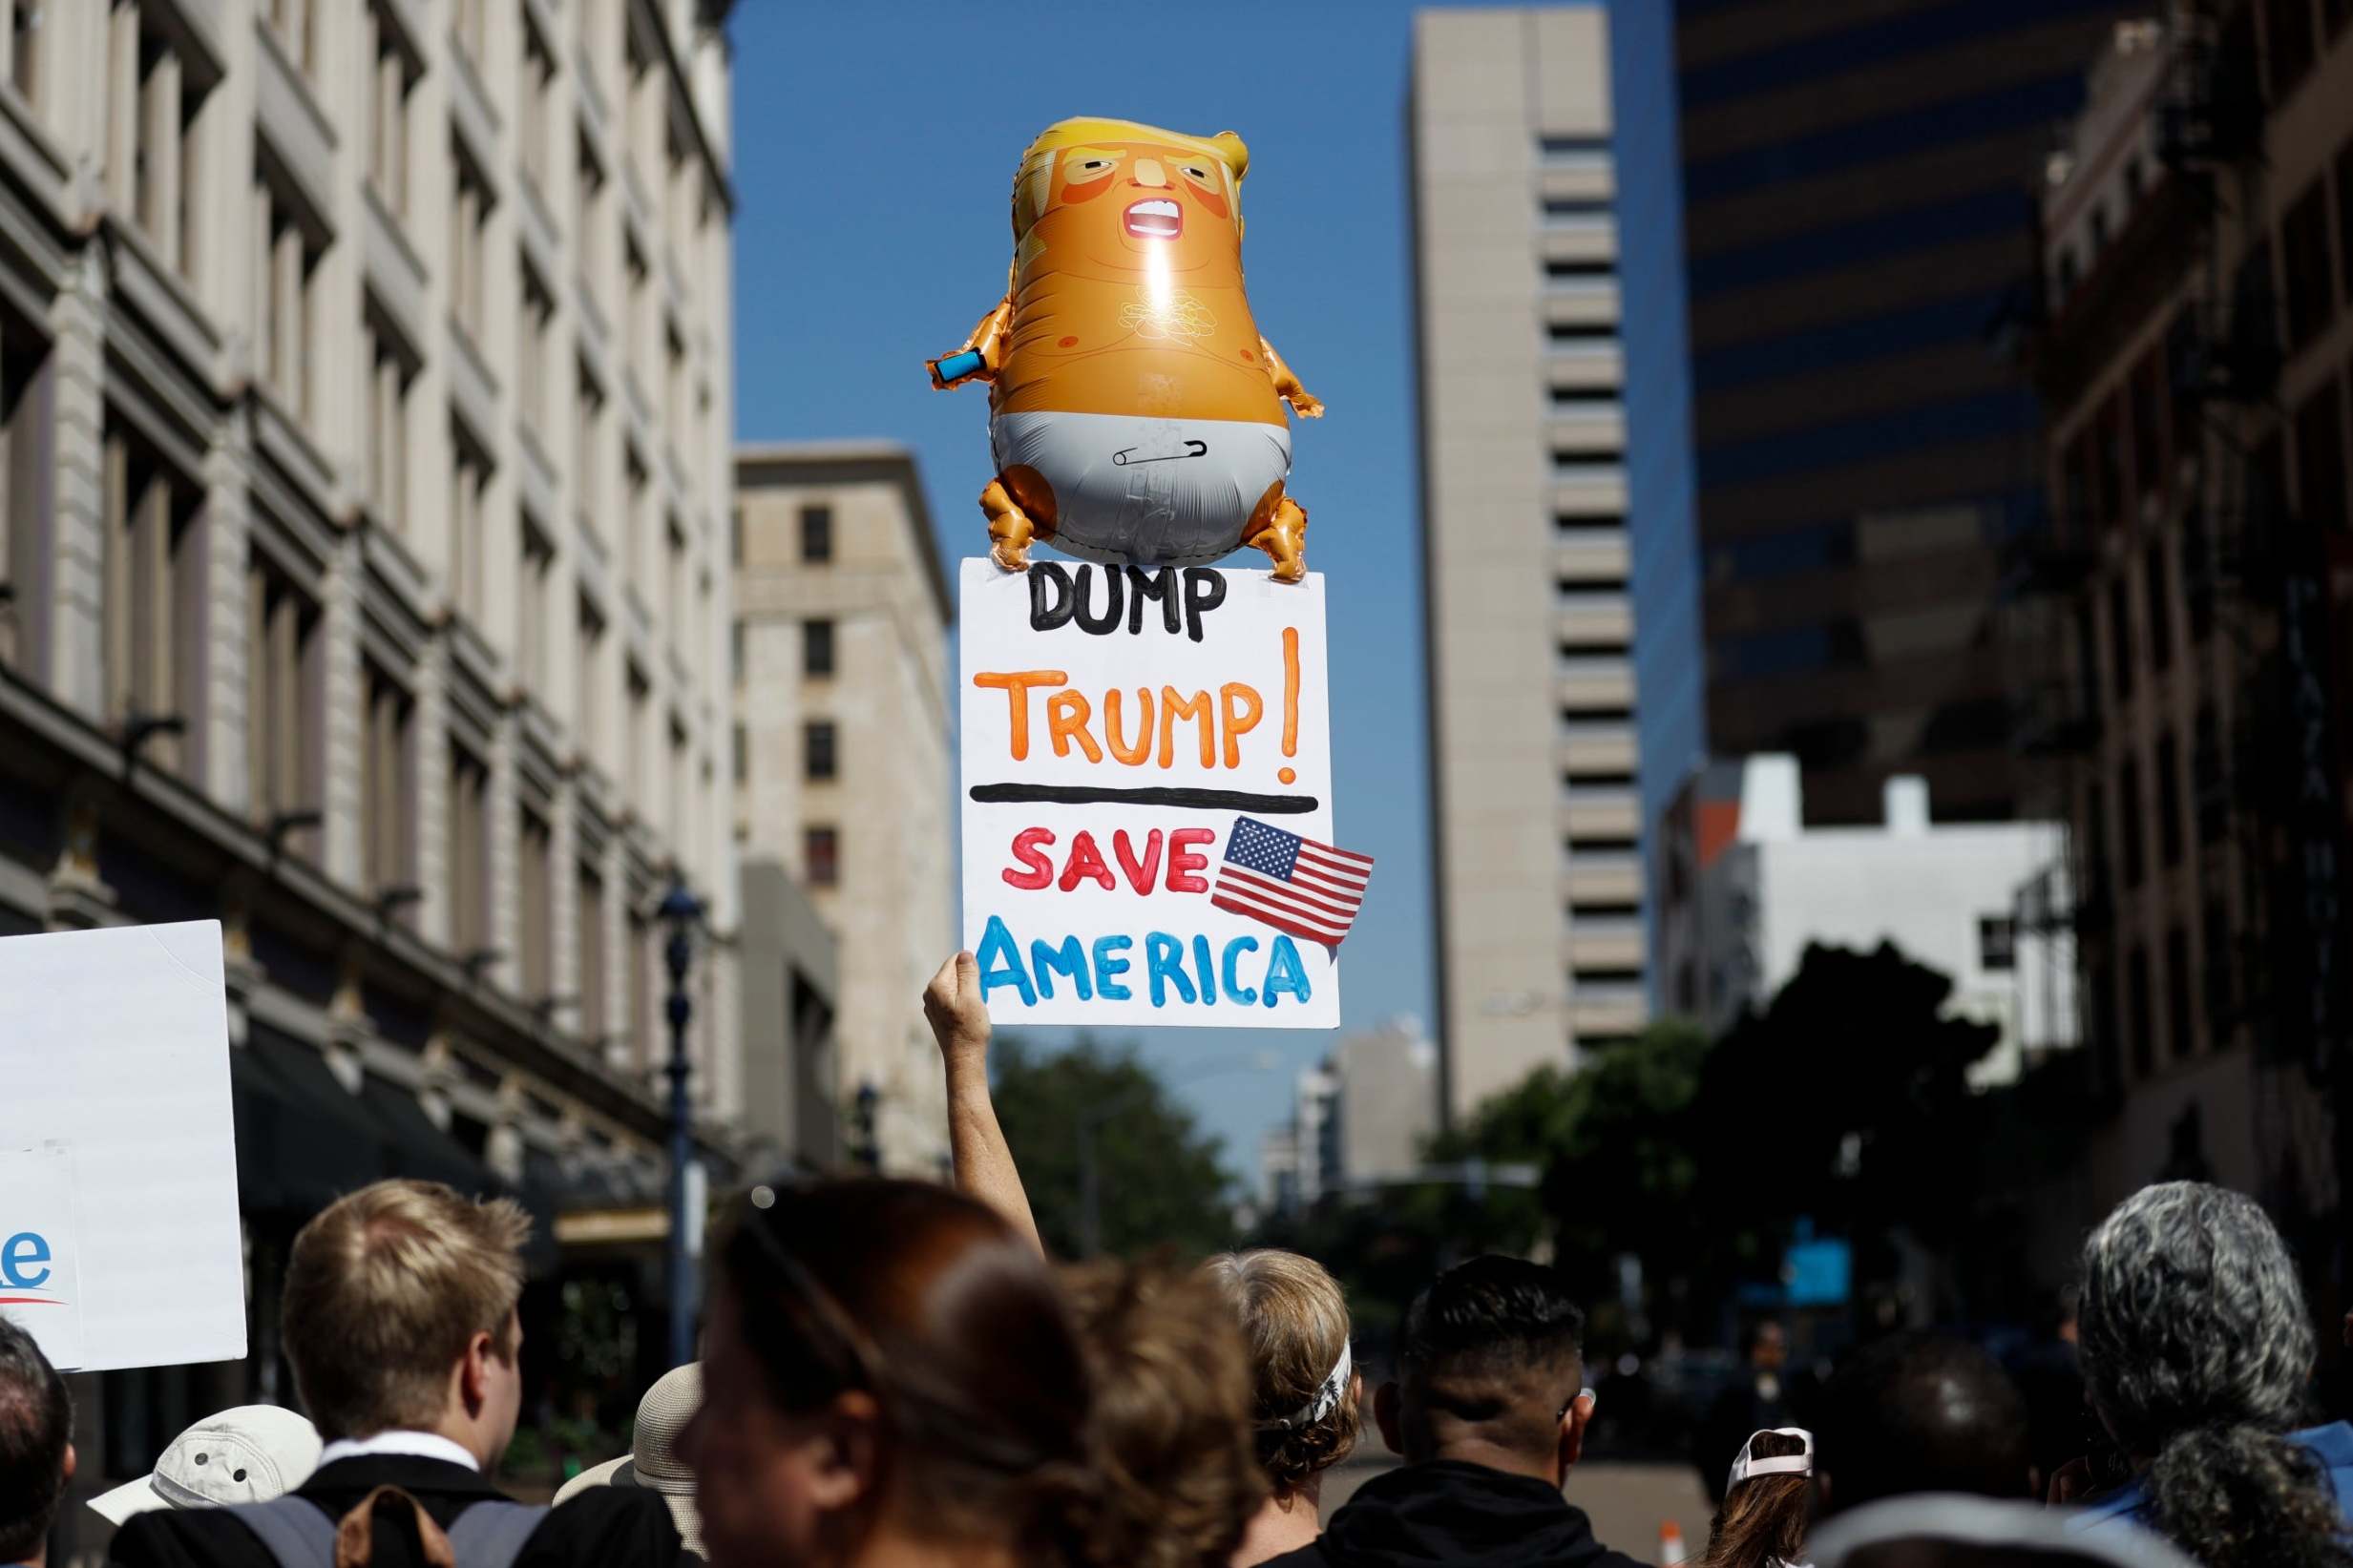 People protest Donald Trump's arrival to a fundraiser in San Diego